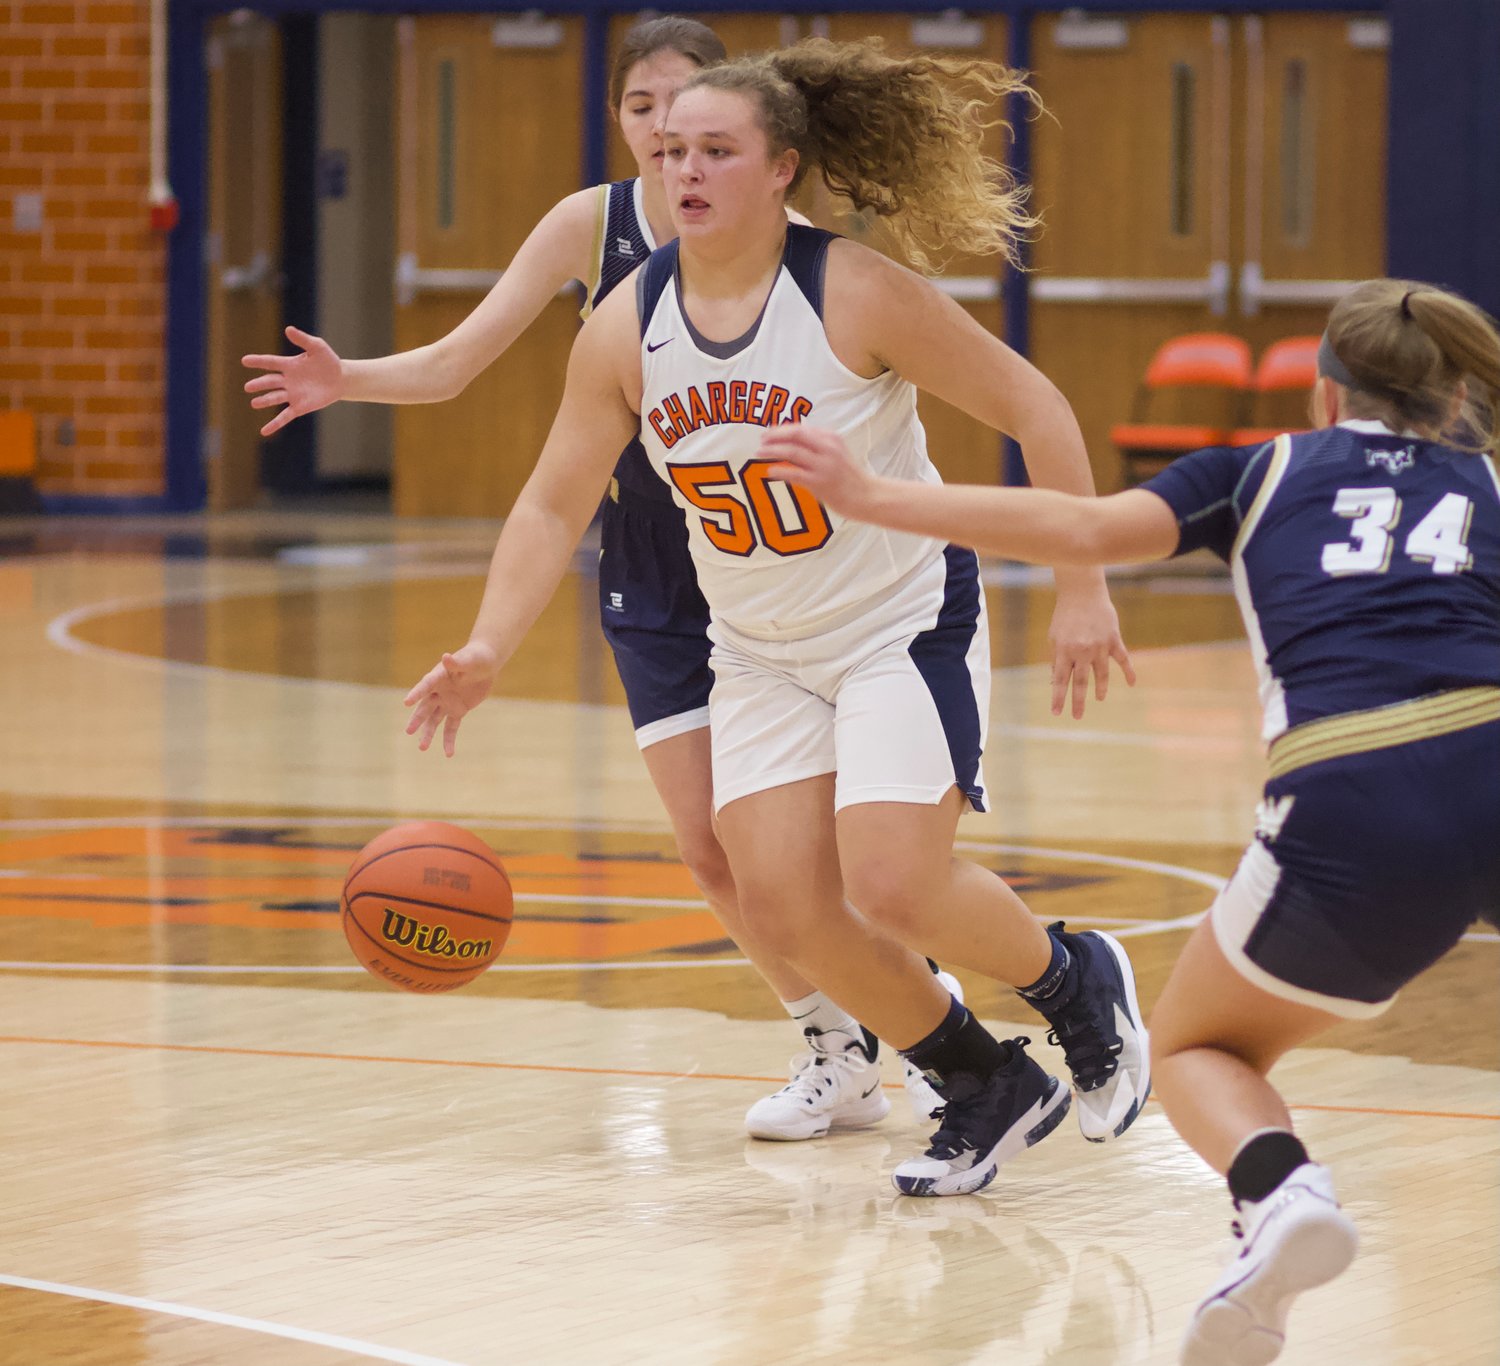 Sophomore Piper Ramey will be the focal point of the Chargers this season as she looks to lead North 
Montgomery to another successful season.